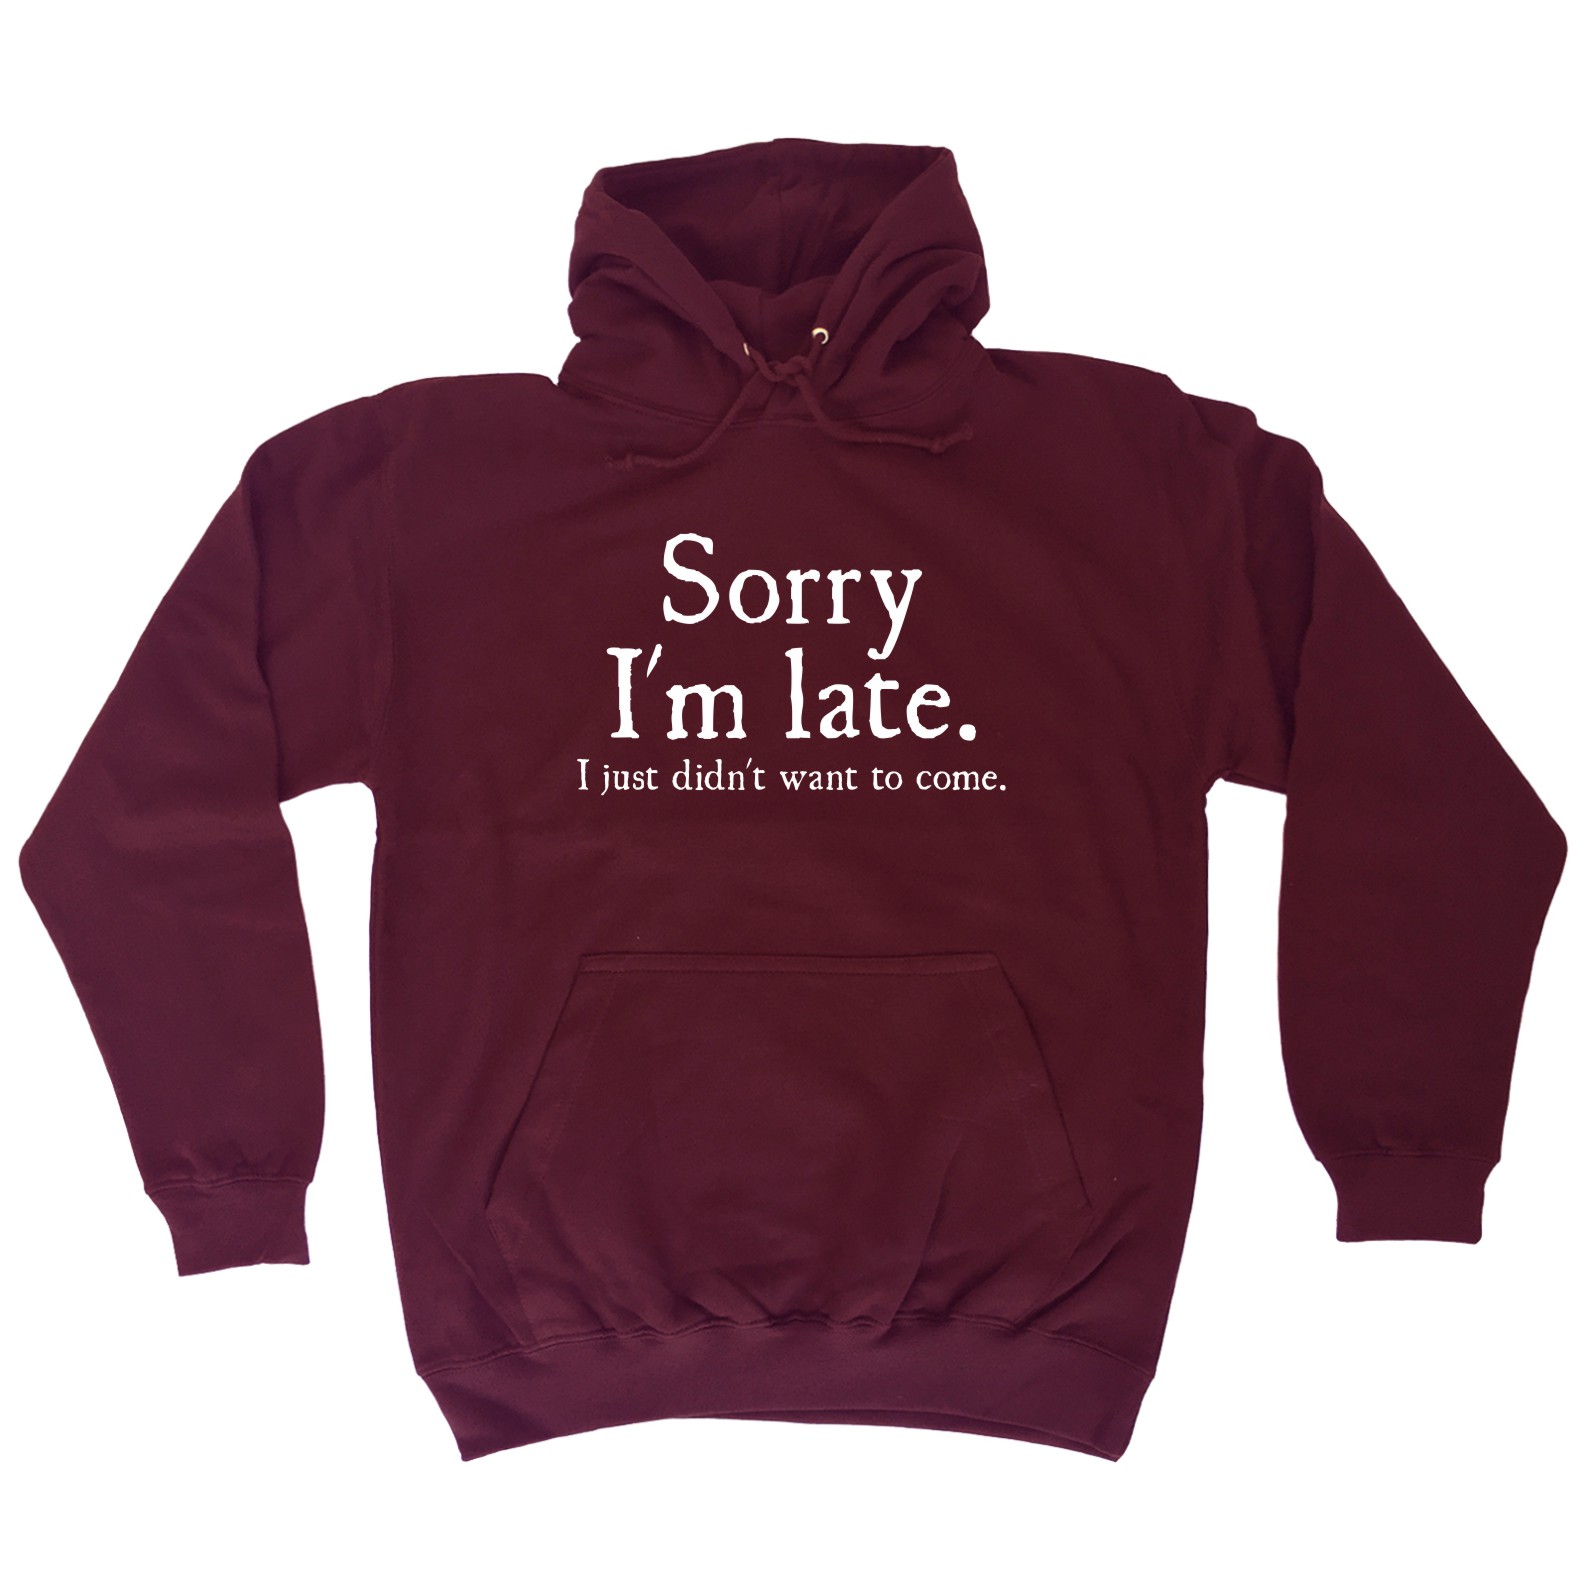 Sorry Im Late I Just Didnt Want To Come Funny Joke Offensive Hoodie Birthday £14 84 Picclick Uk